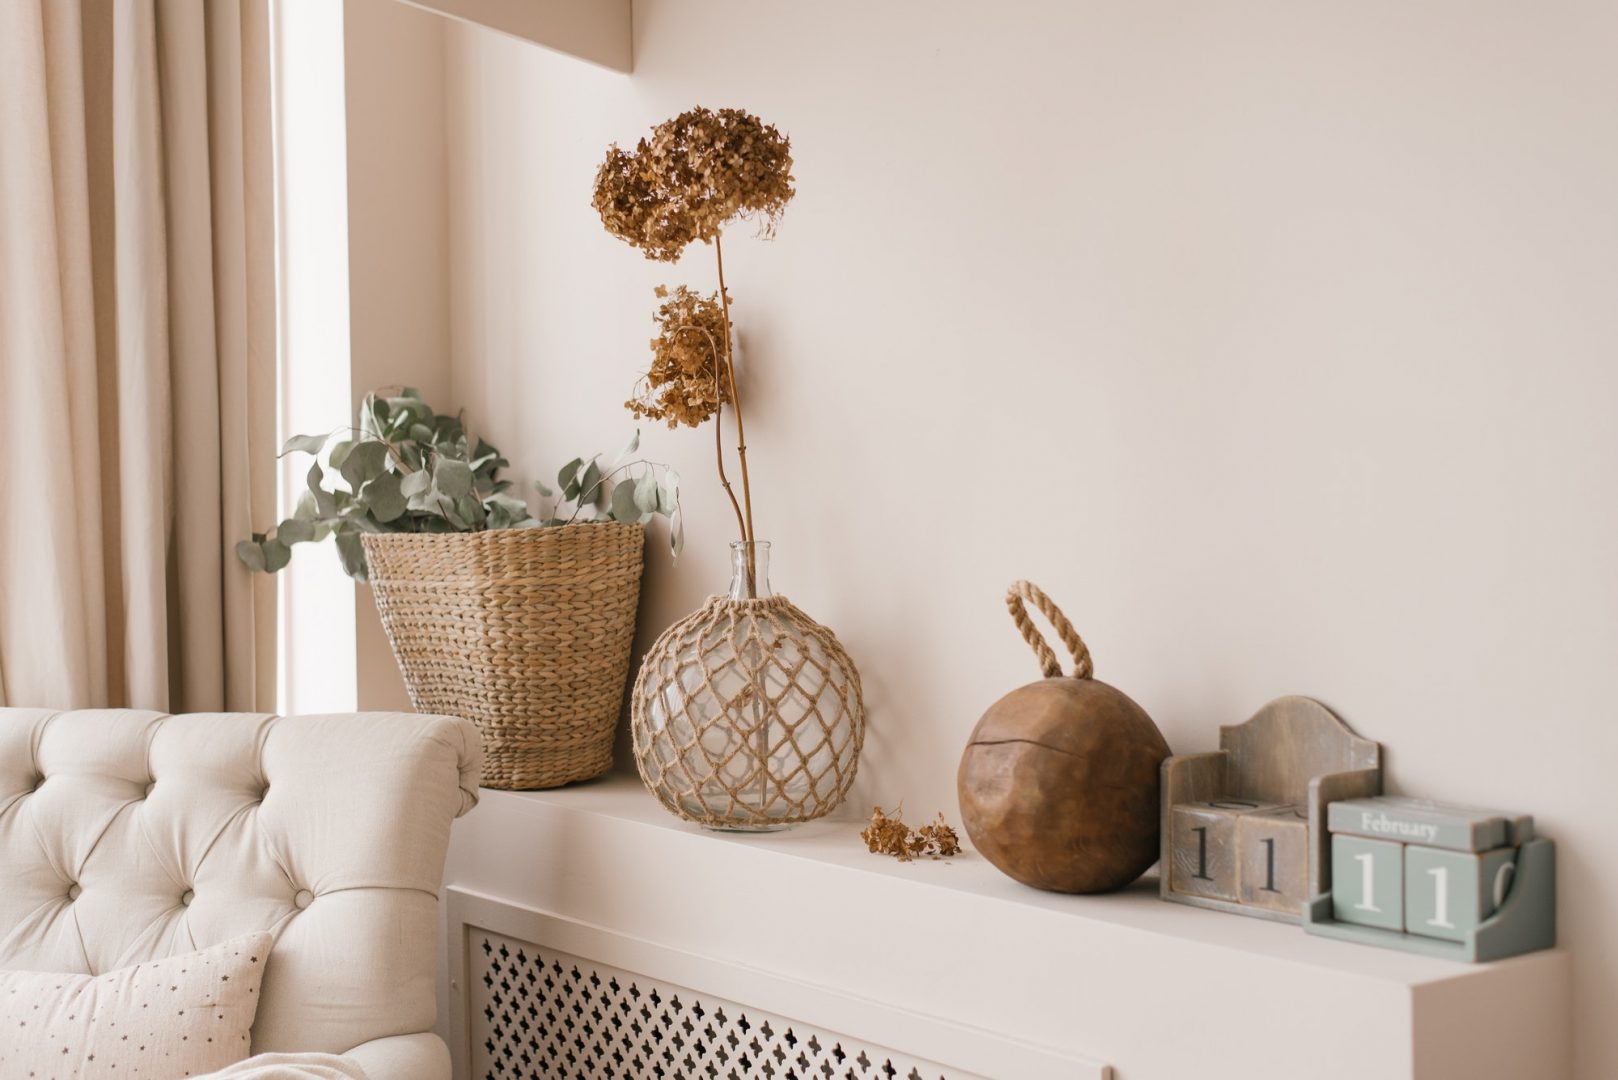 Scandinavian decor as a decoration in the house. Dried hydrangea flowers in a vase